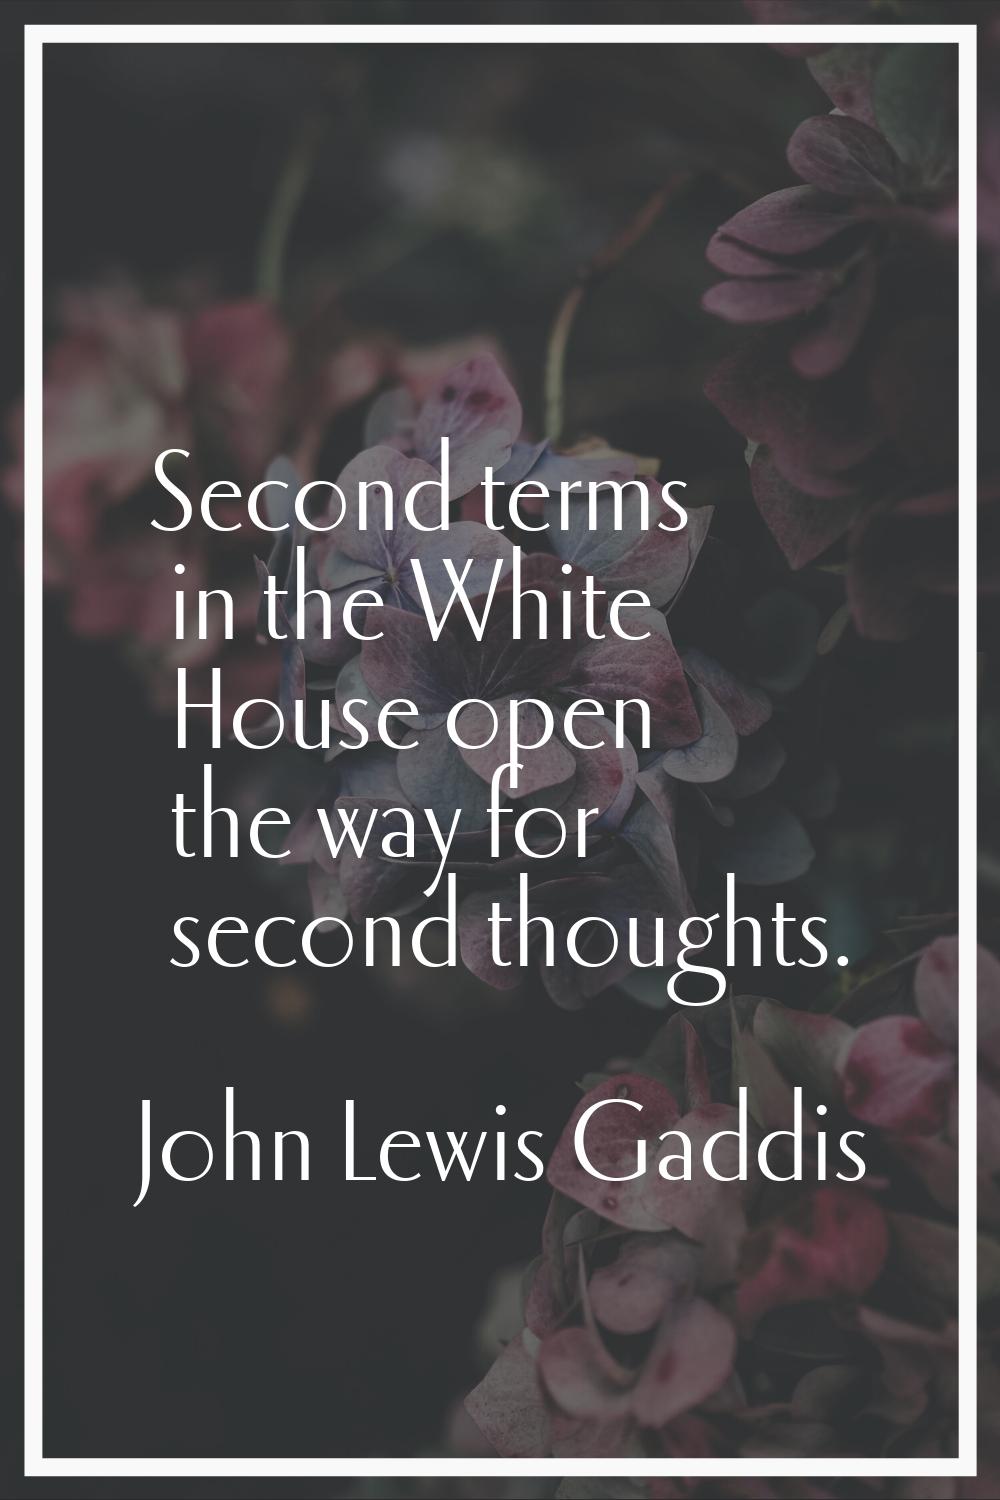 Second terms in the White House open the way for second thoughts.